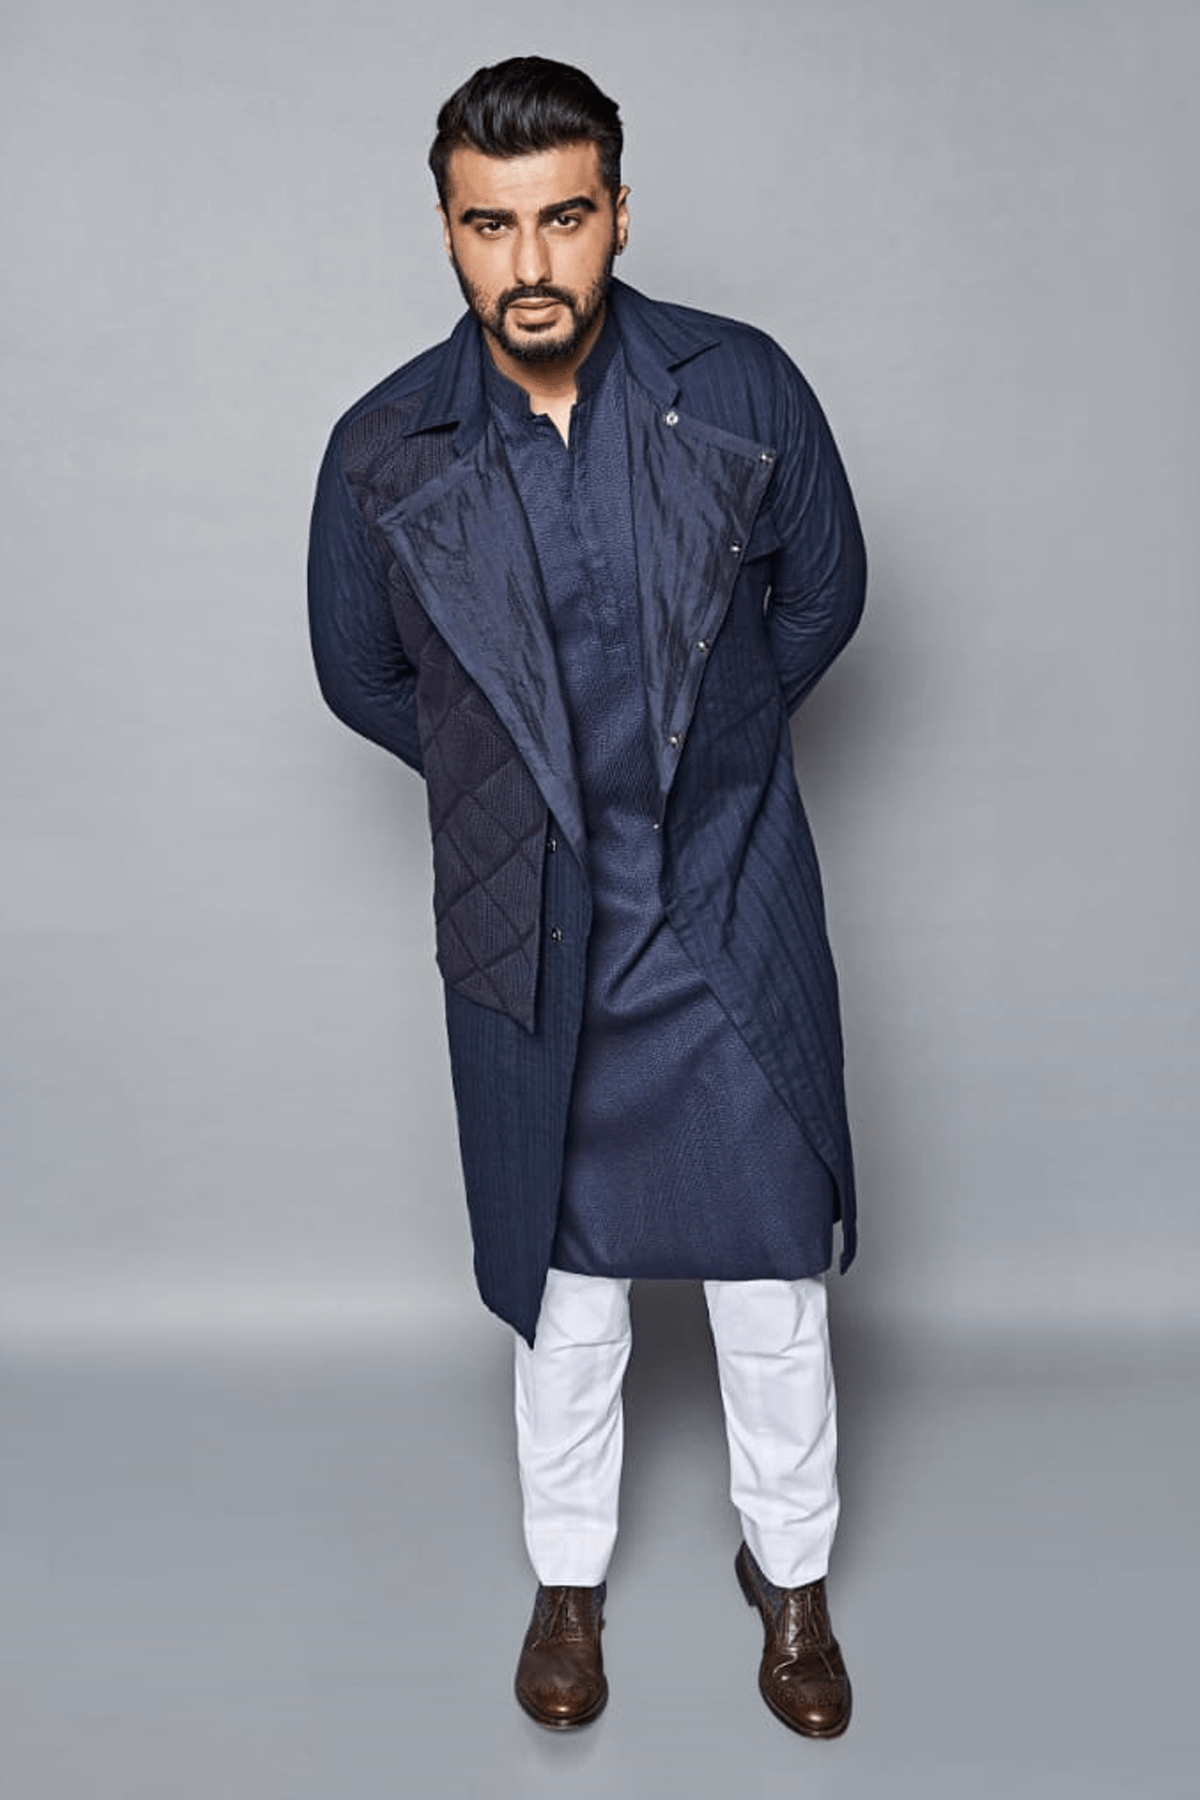 Arjun Kapoor In Dark blue trench style shirt jacket with knit flap - Kunal Anil Tanna